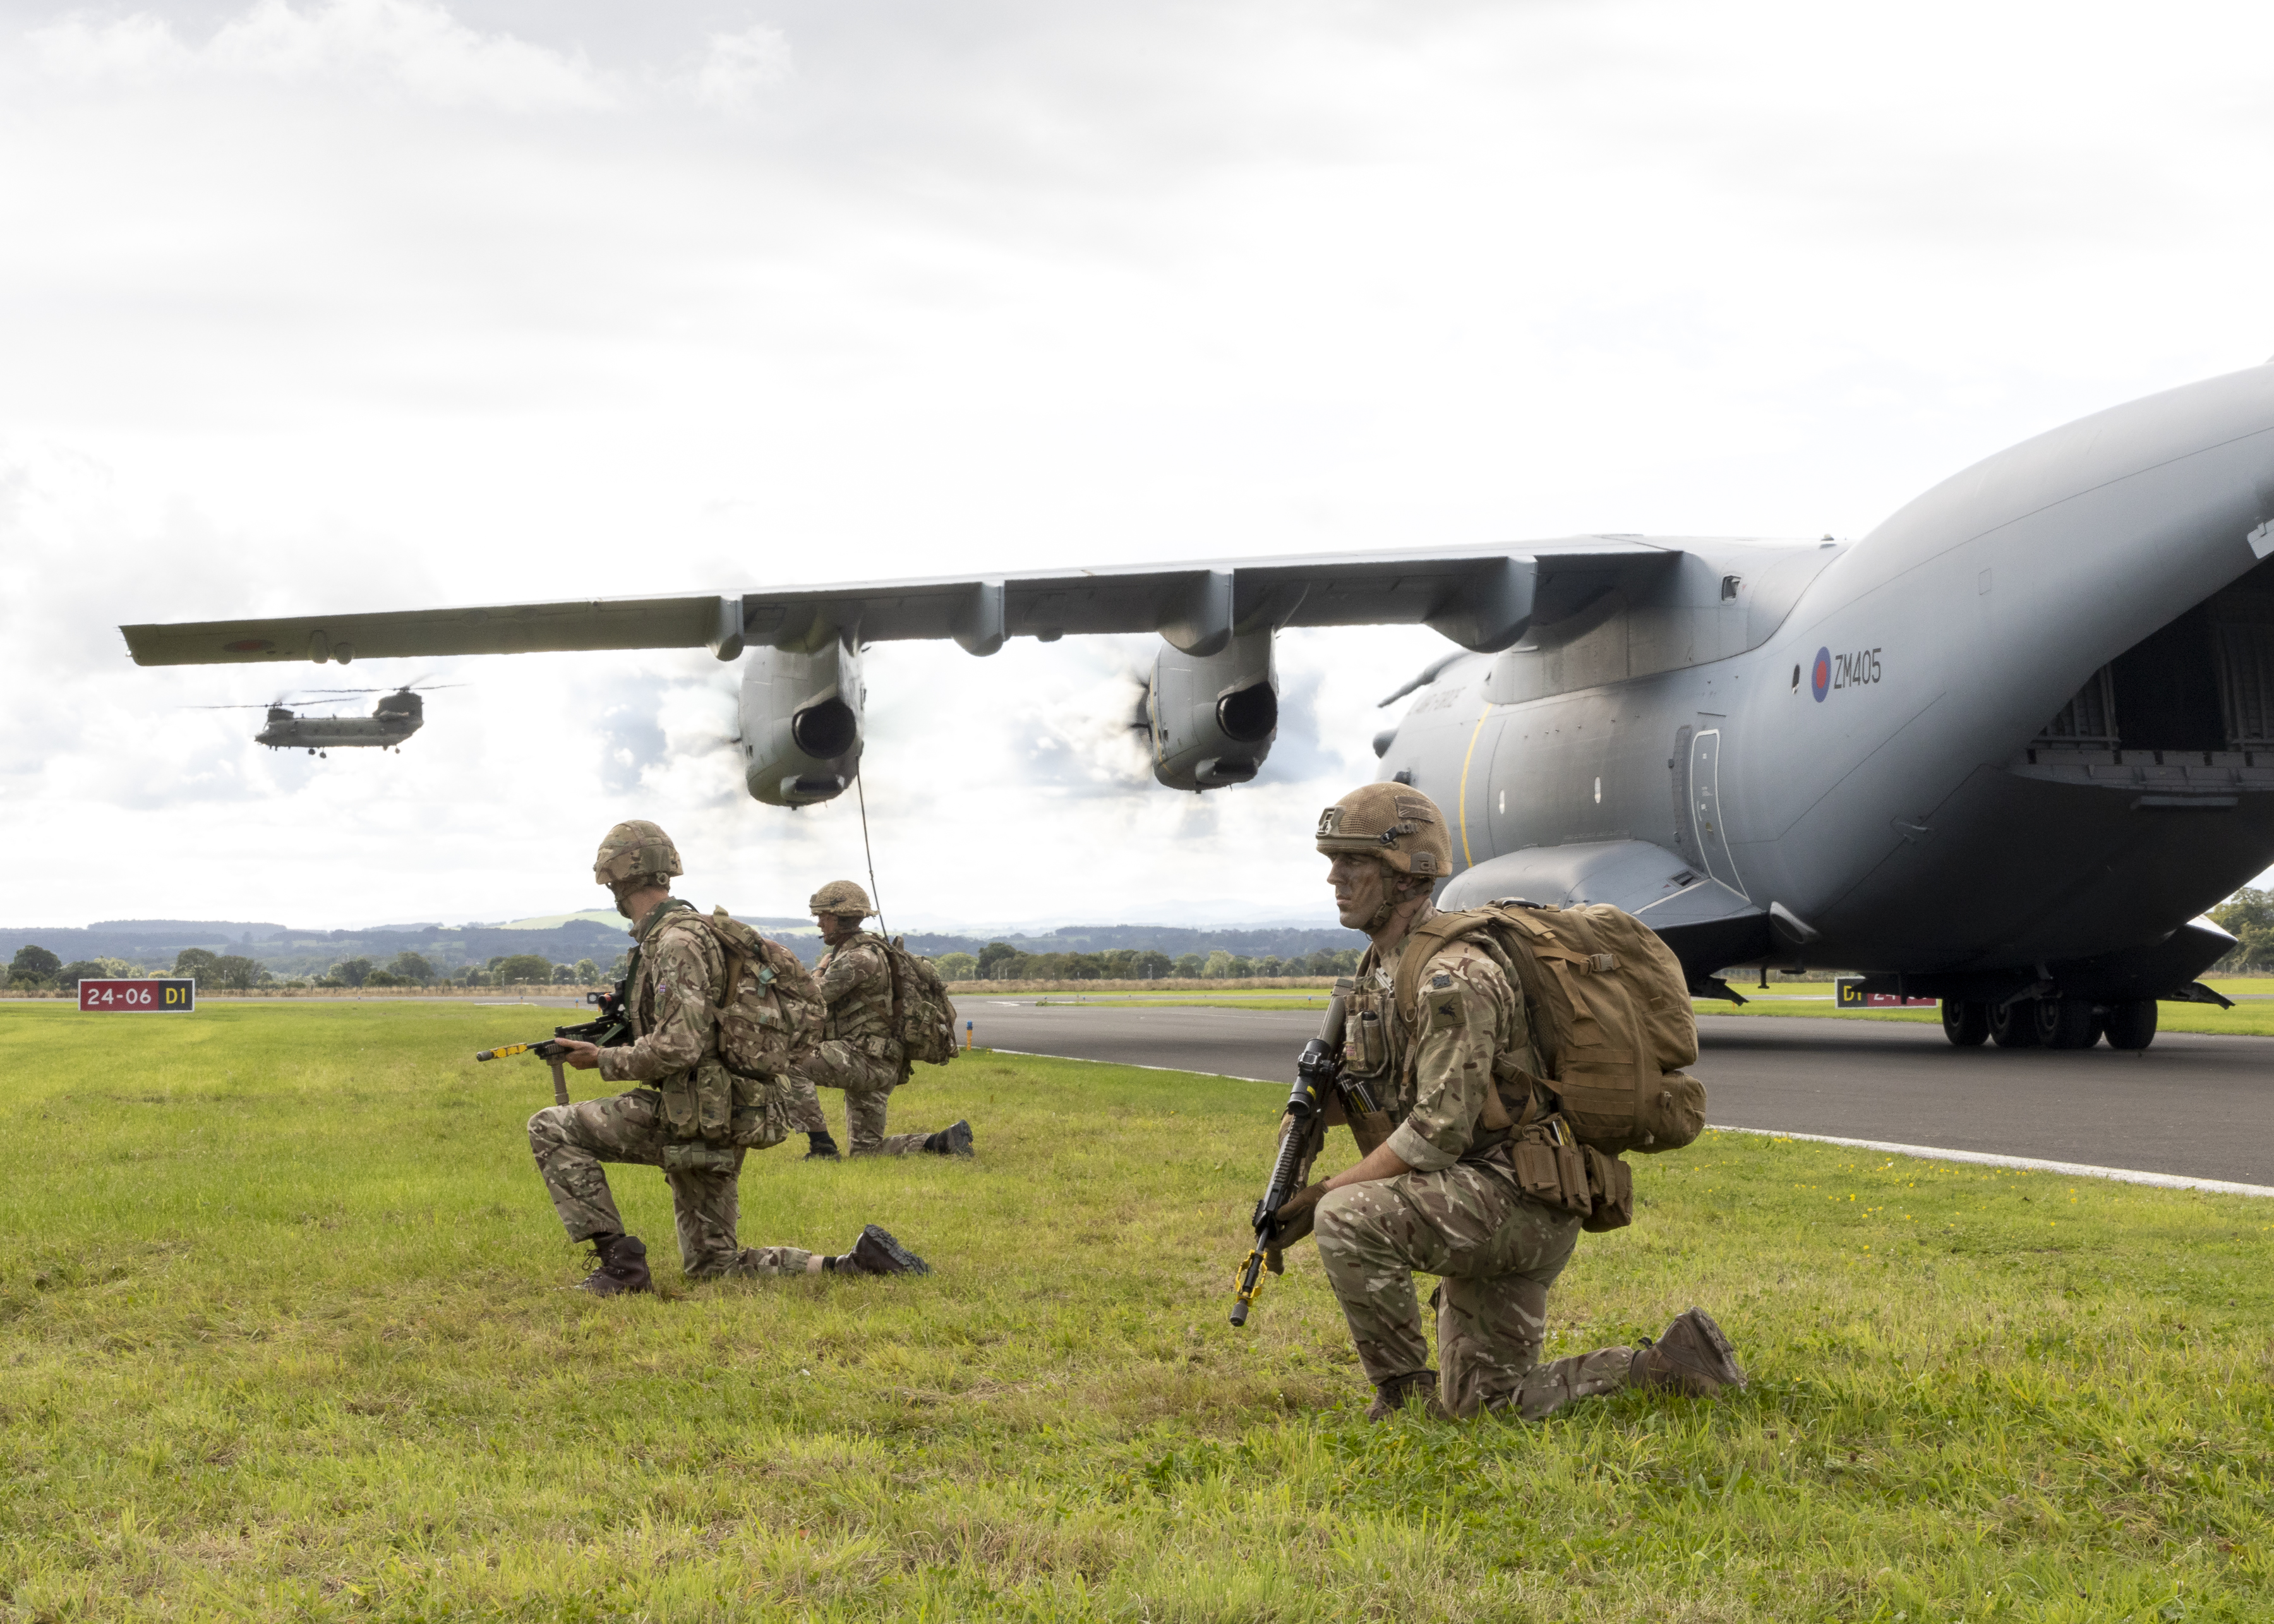 Image shows RAF Regiment with rifles kneeling by an Atlas aircraft on the airfield.